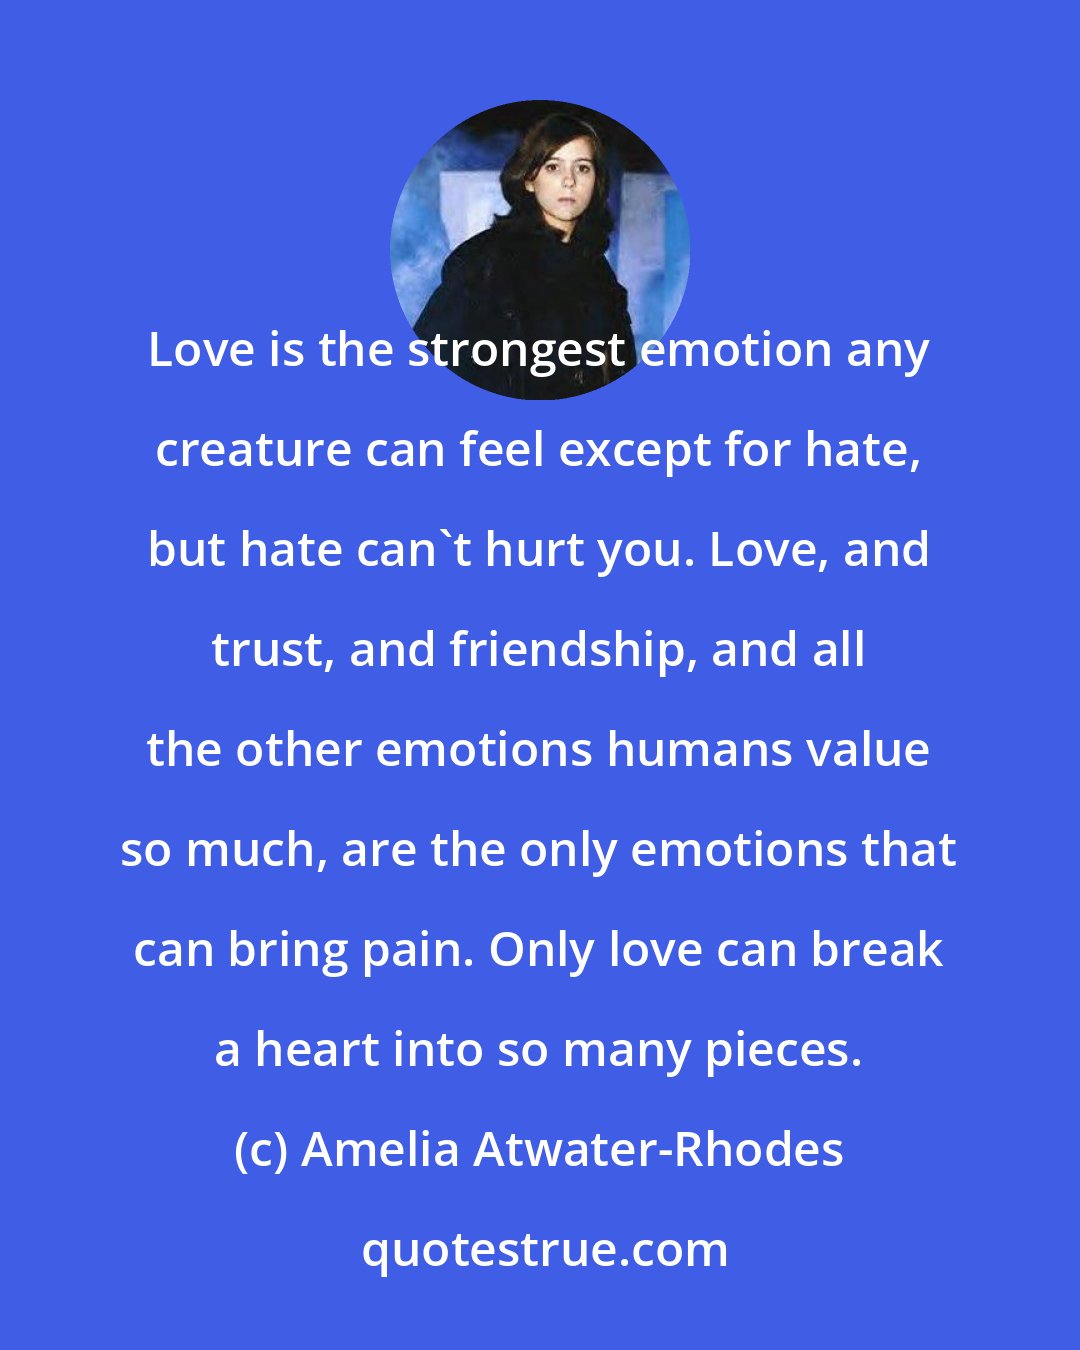 Amelia Atwater-Rhodes: Love is the strongest emotion any creature can feel except for hate, but hate can't hurt you. Love, and trust, and friendship, and all the other emotions humans value so much, are the only emotions that can bring pain. Only love can break a heart into so many pieces.